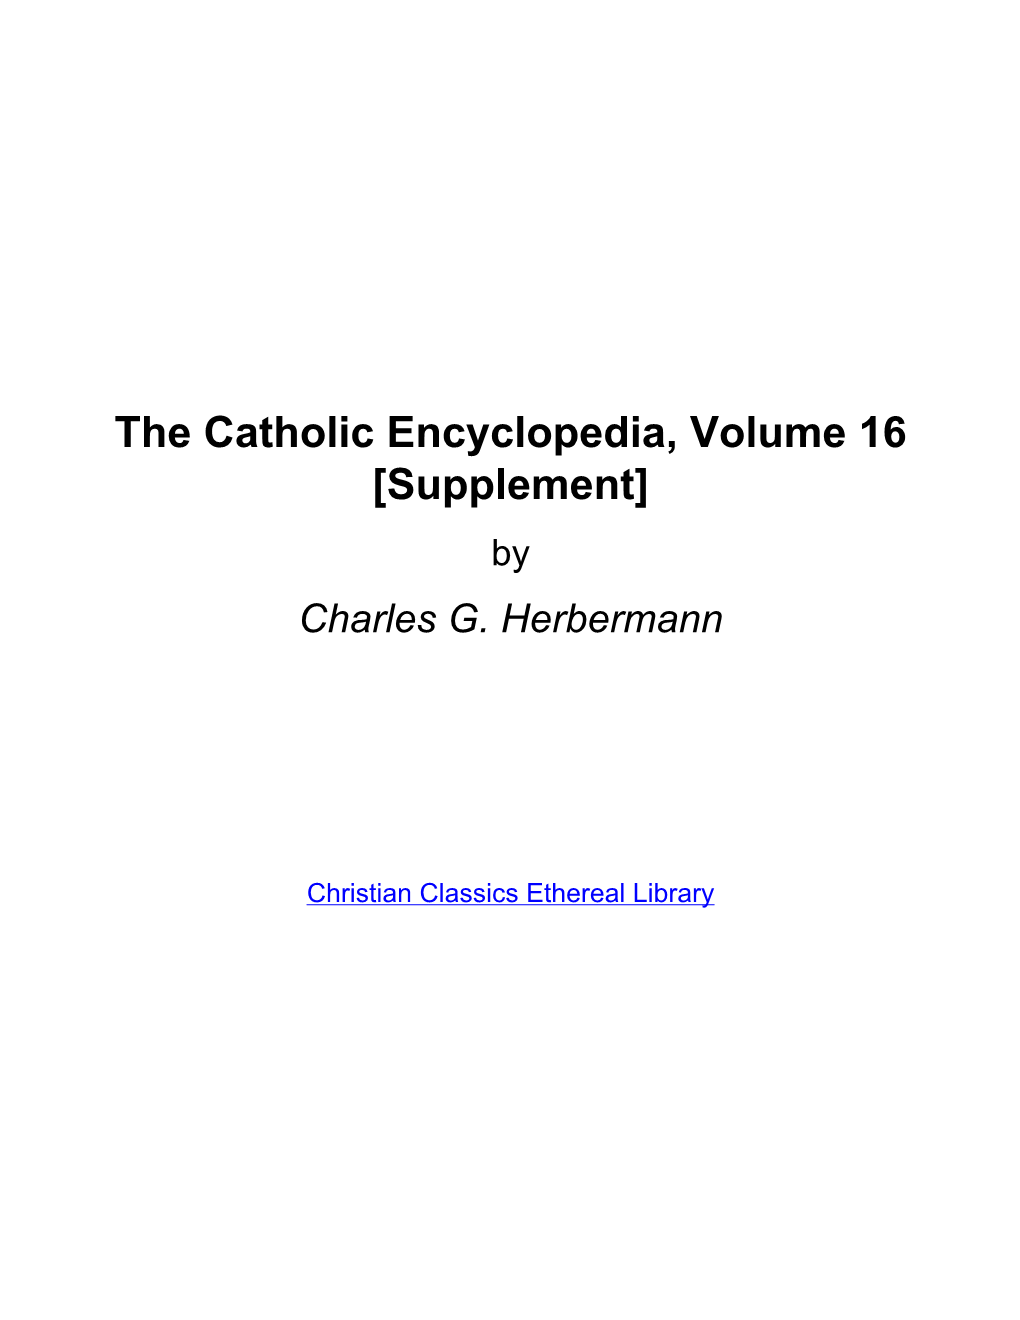 The Catholic Encyclopedia, Volume 16 [Supplement] by Charles G